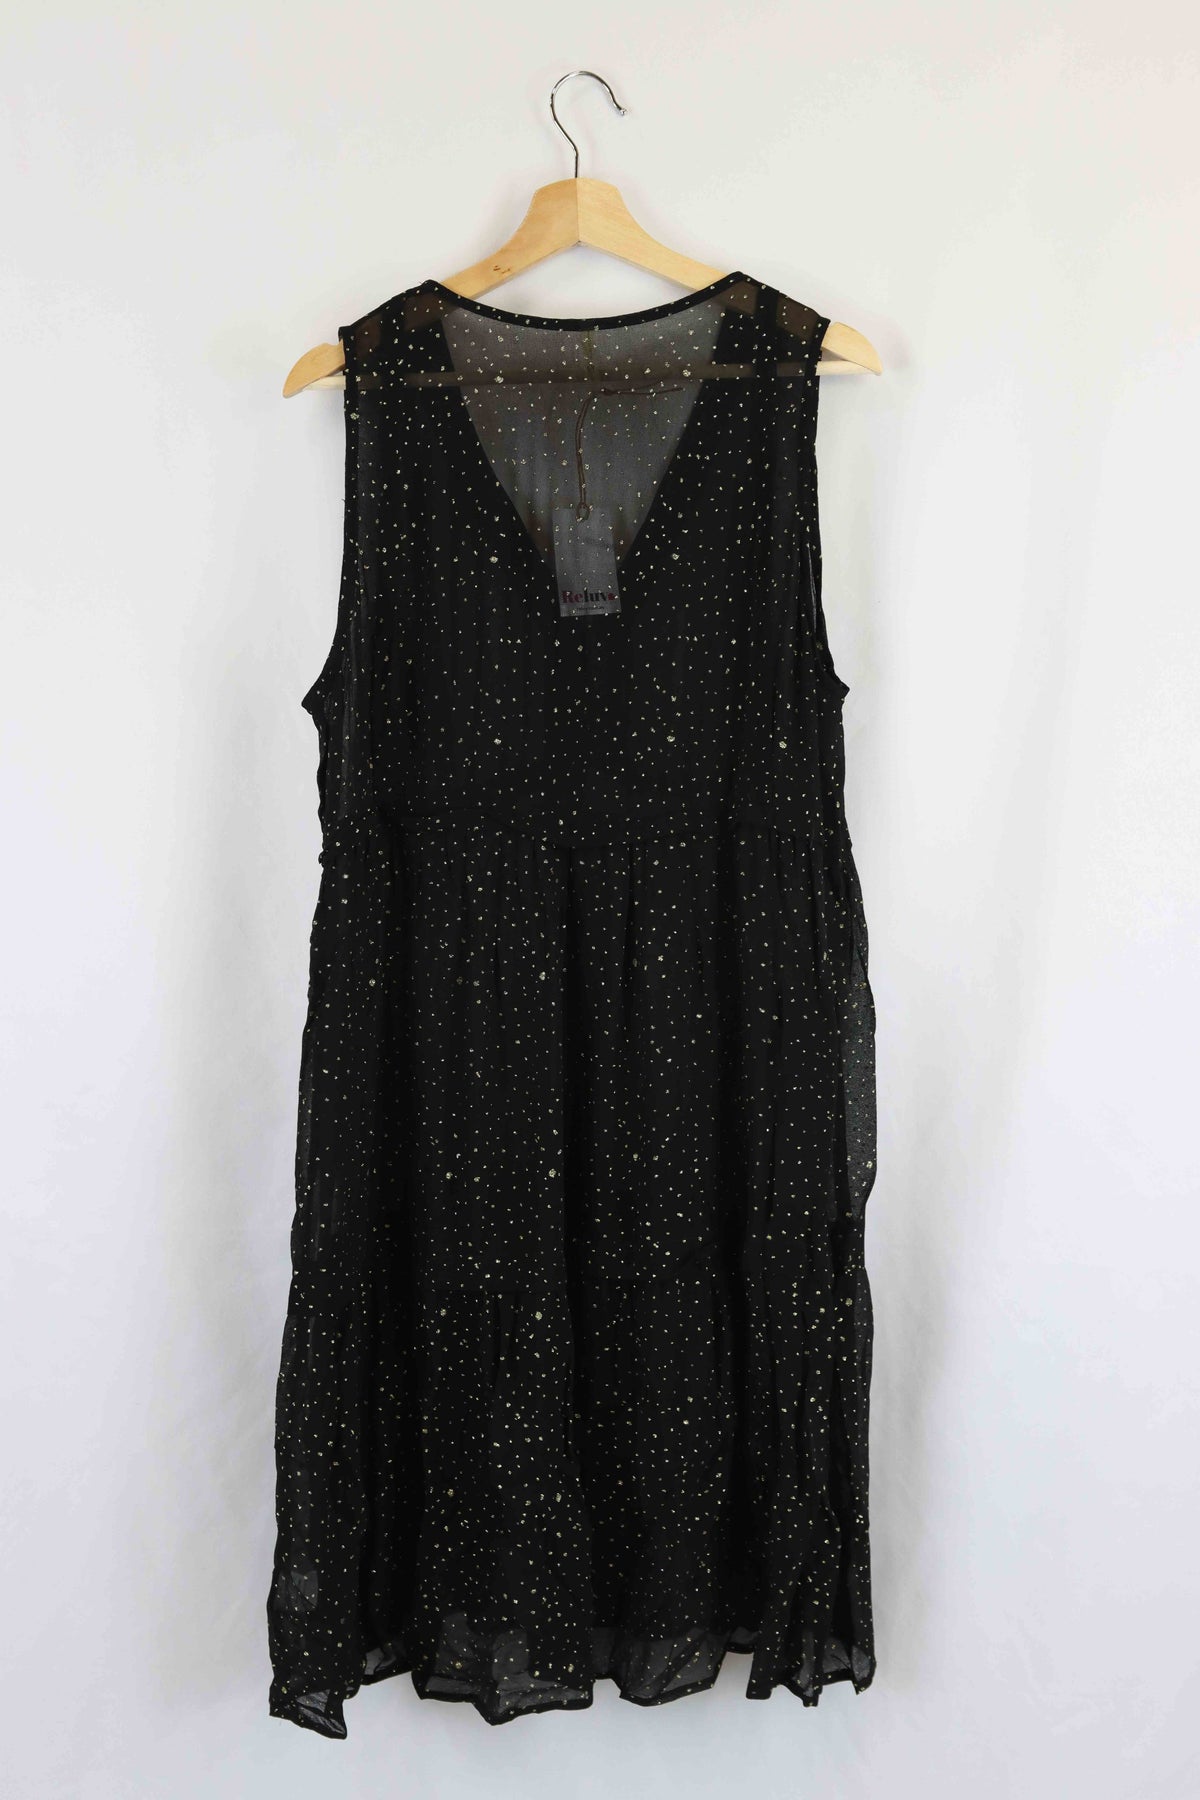 Jimmy Jean Black And Gold Dress 14